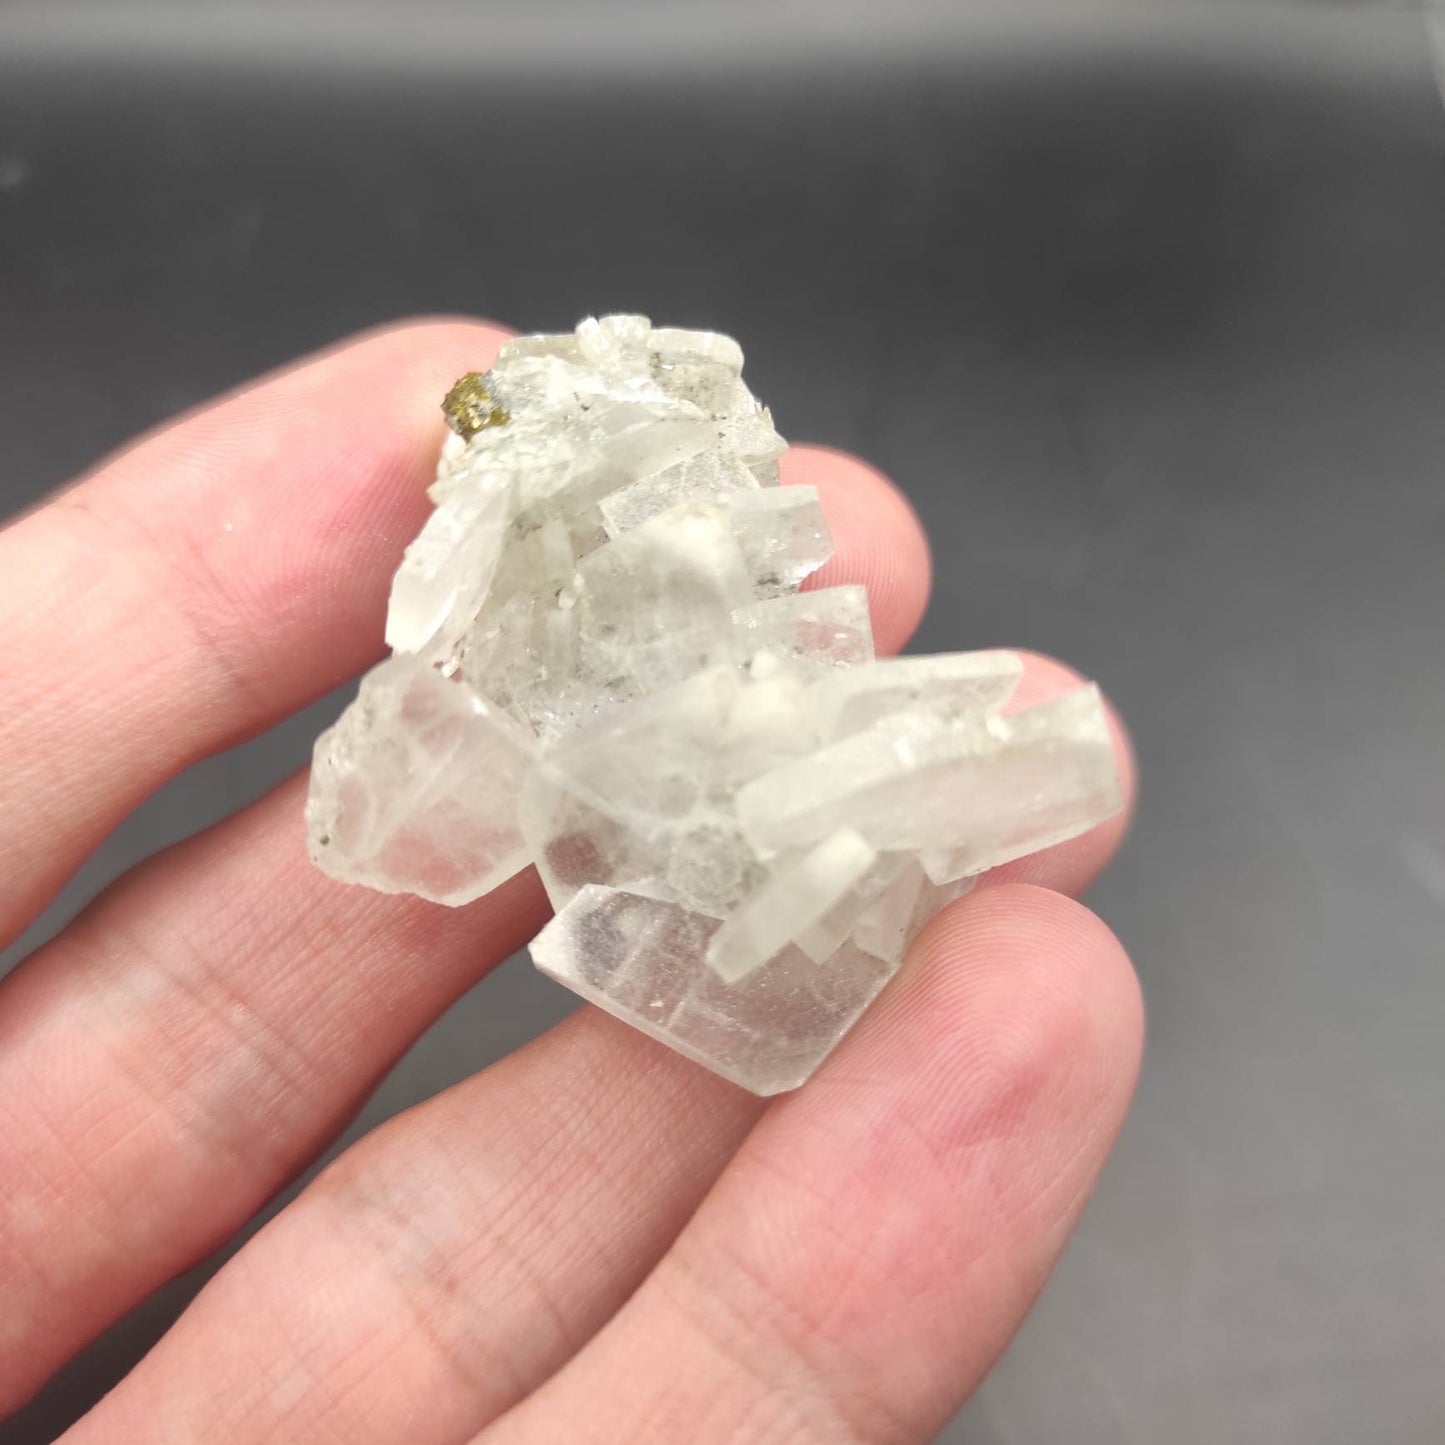 21g White Calcite Cluster - Natural Calcite Crystals - Calcite Specimen from Pakistan - Rough Calcite Crystal - Natural Calcite Formation